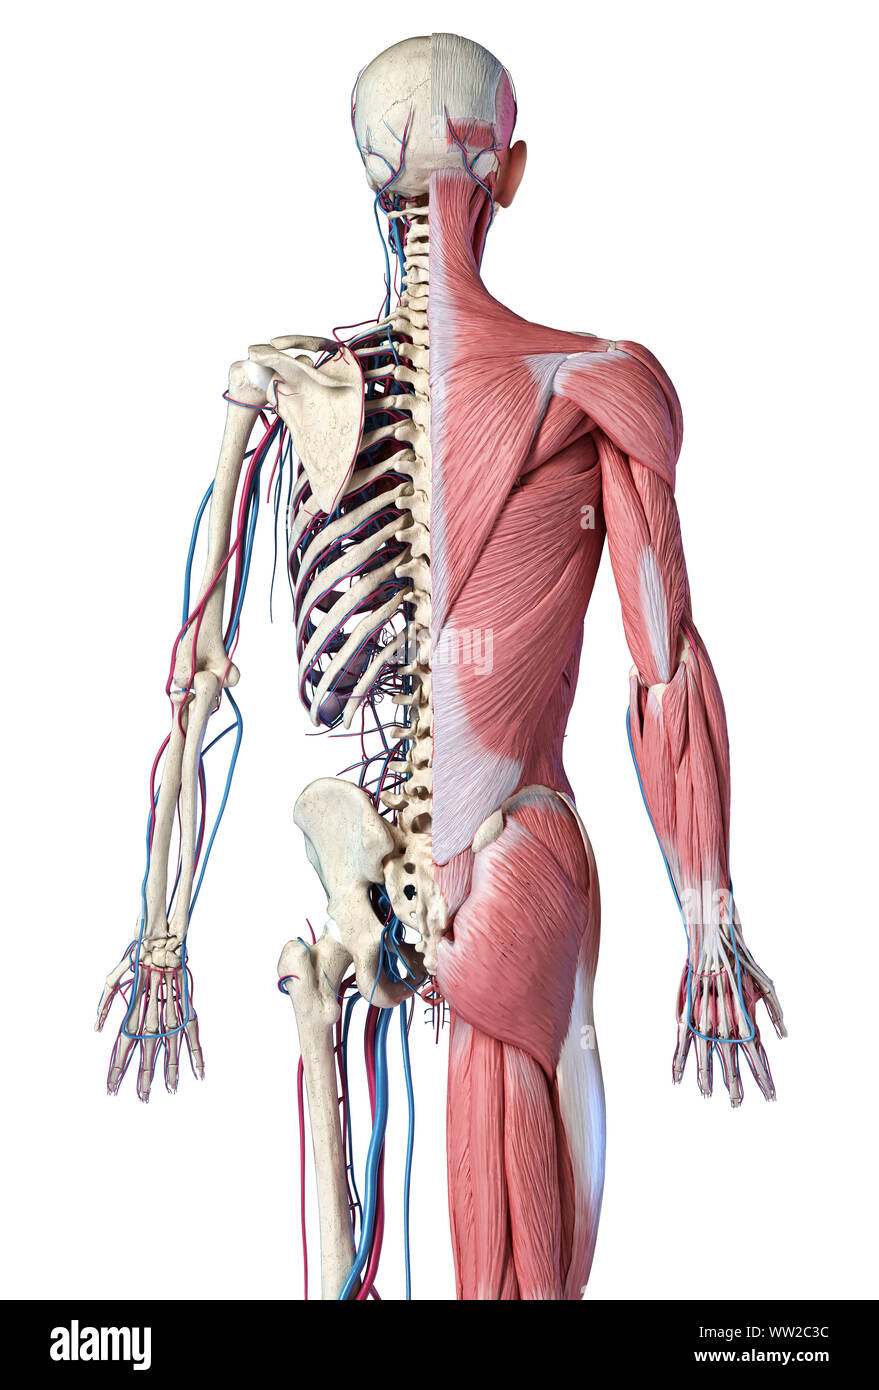 Human Anatomy 3 4 Body Skeletal Muscular And Cardiovascular Systems Back View On White Background 3d Illustration Stock Photo Alamy